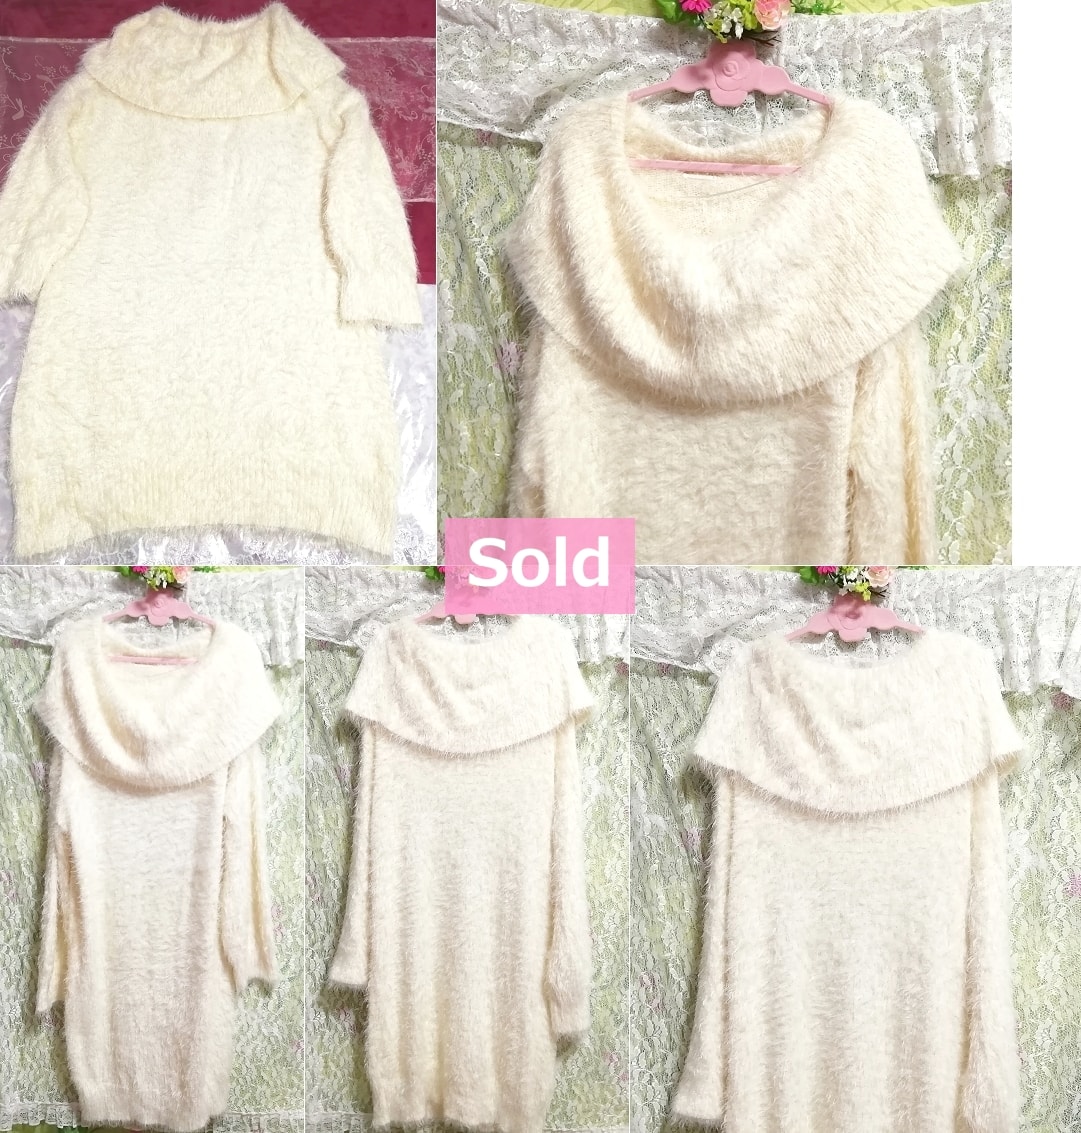 White fluffy onepiece long sleeve long sweater / knit / tops White fluffy onepiece long sleeve long sweater / knit / tops